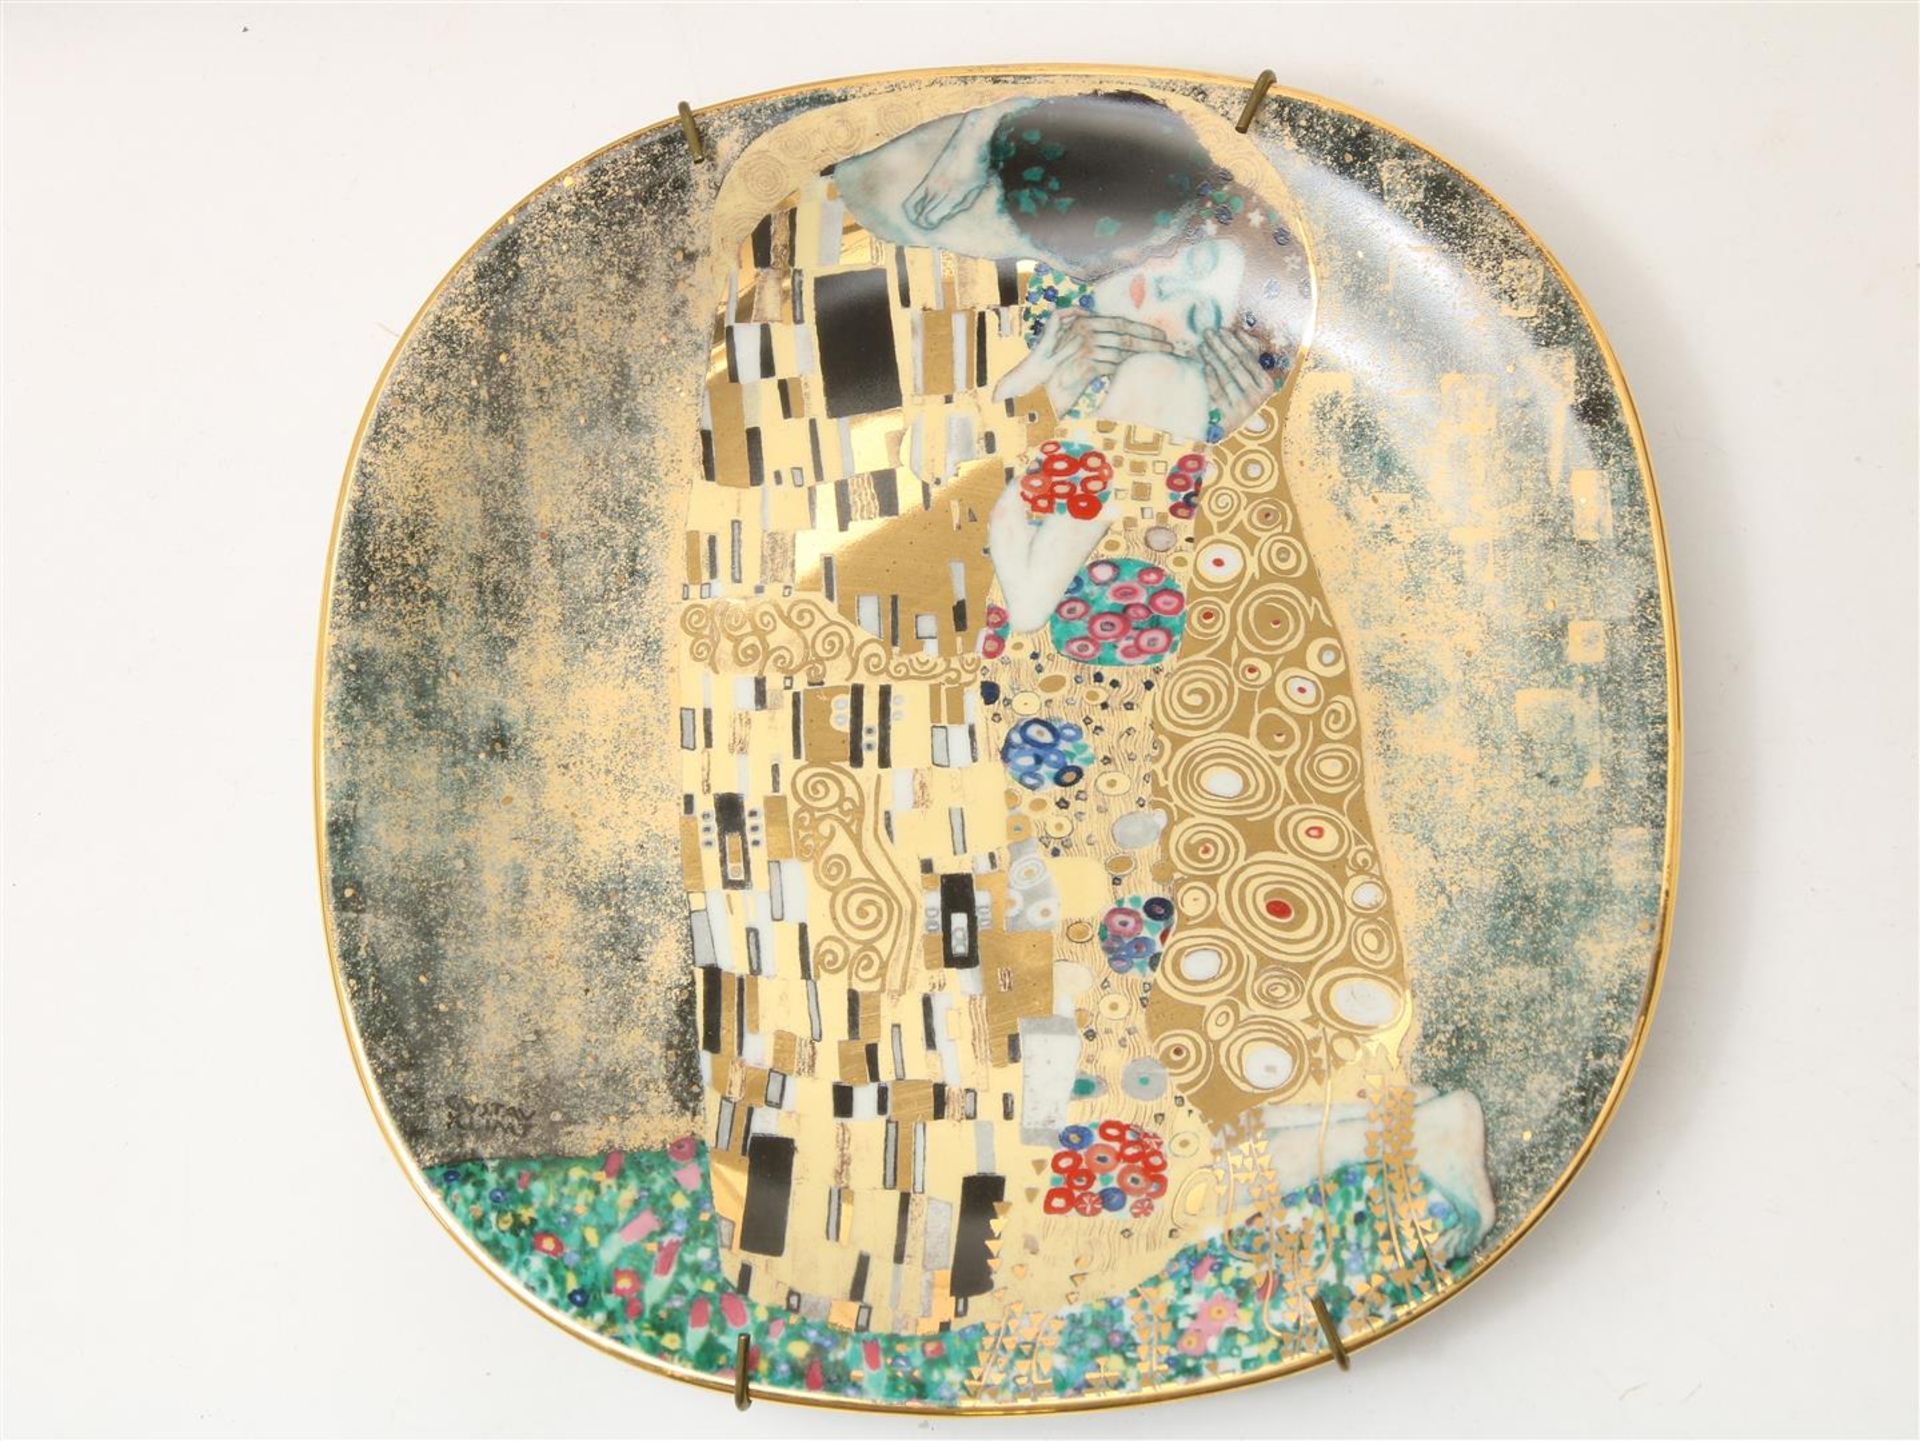 Series of 7 plates with images of the painter Gustav Klimt, Lilien porzellan, "Phantastic - Image 18 of 18